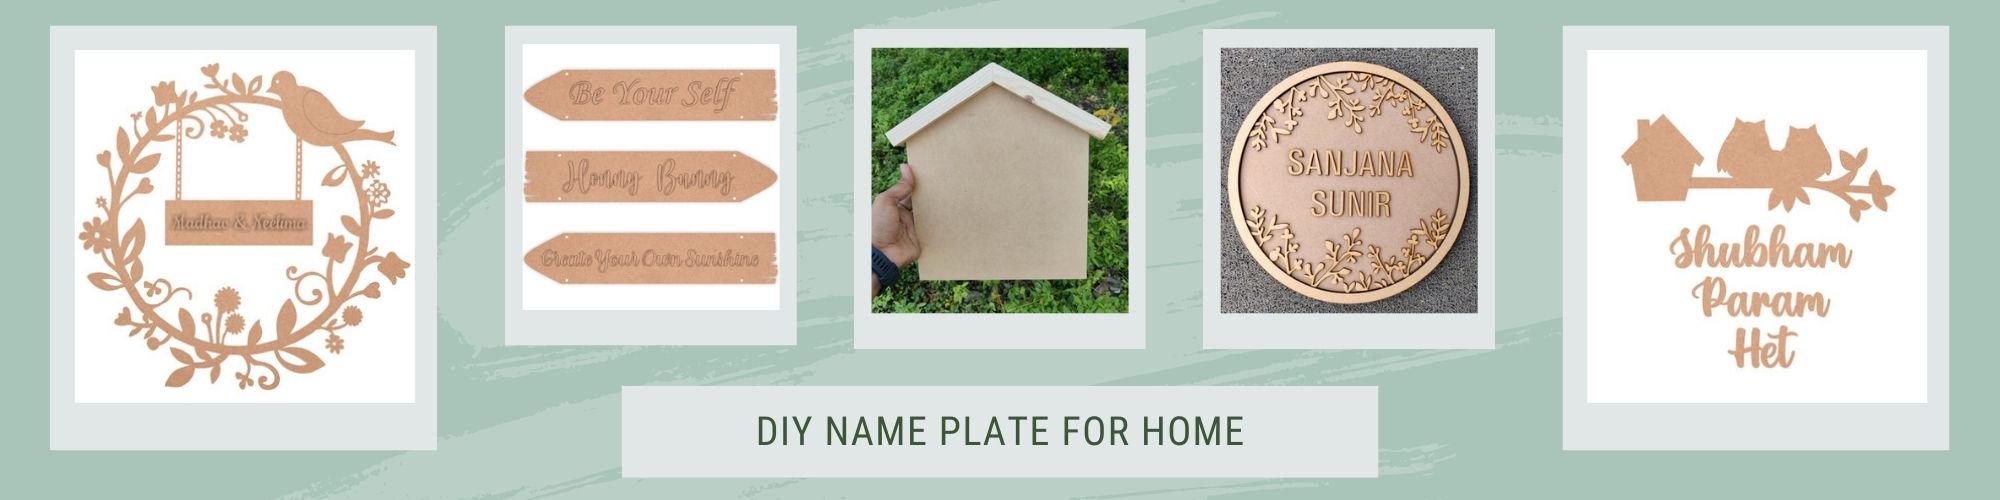 DIY name plate for home